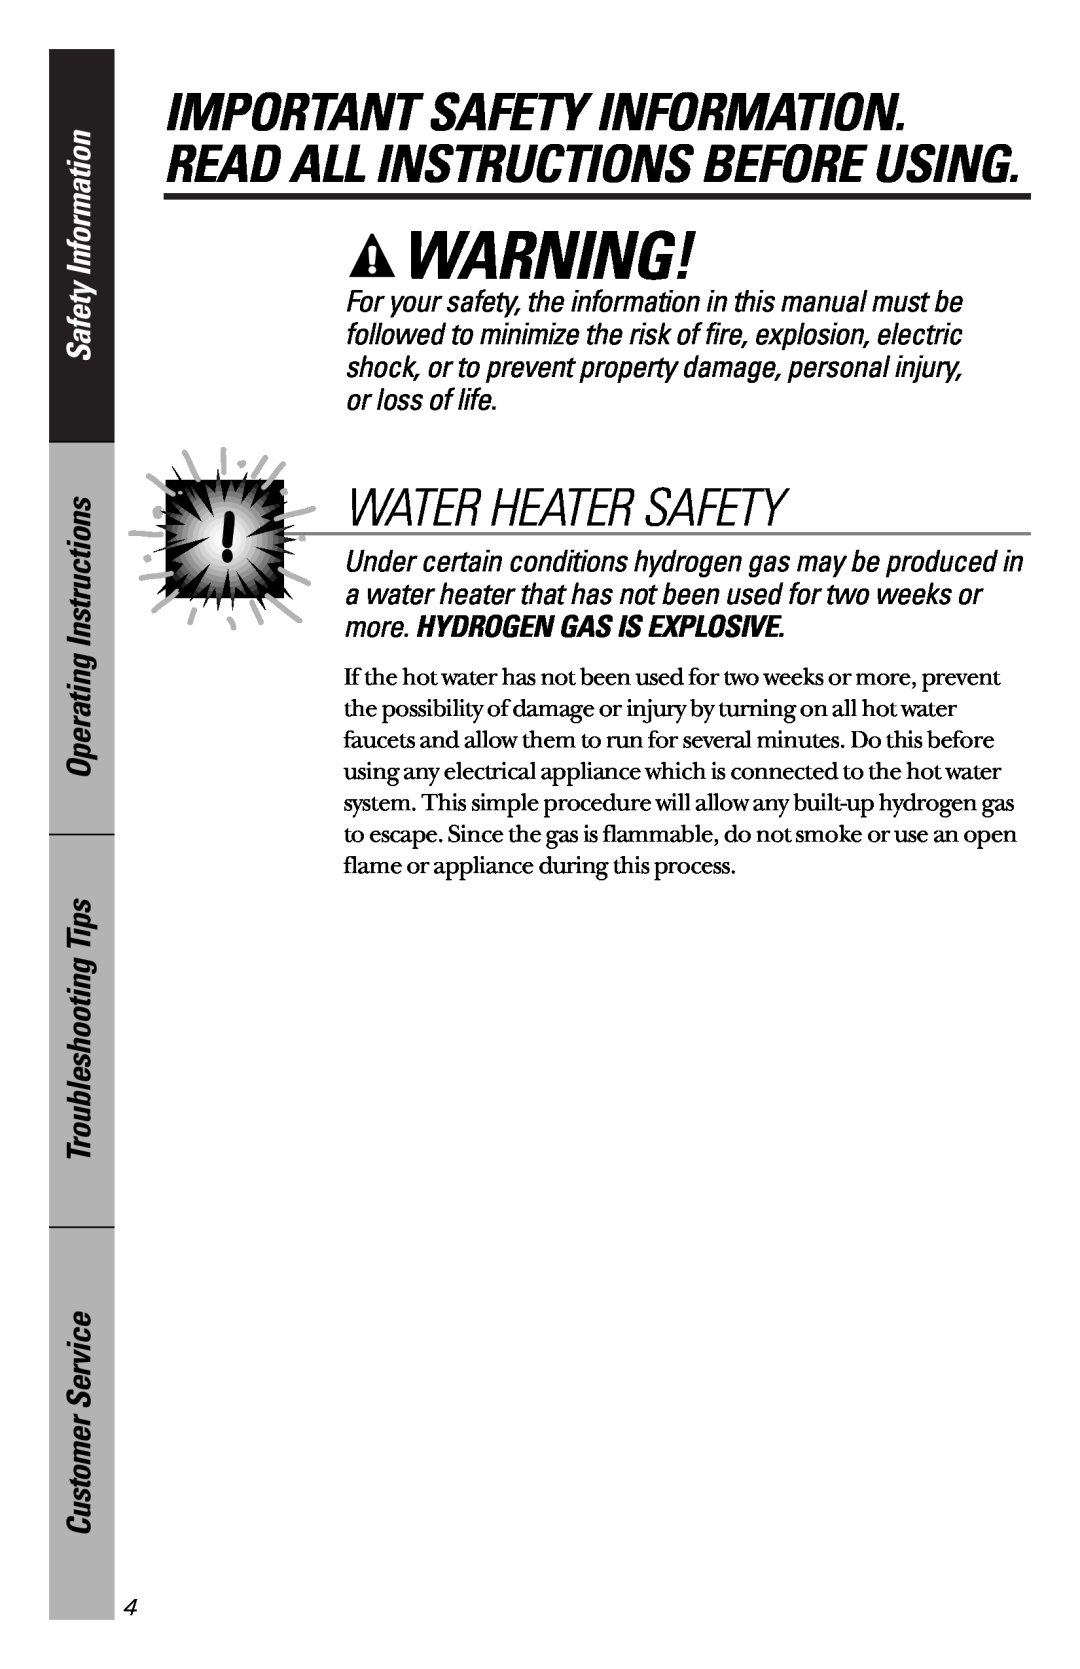 GE 165D4700P227 owner manual Water Heater Safety, Important Safety Information. Read All Instructions Before Using 